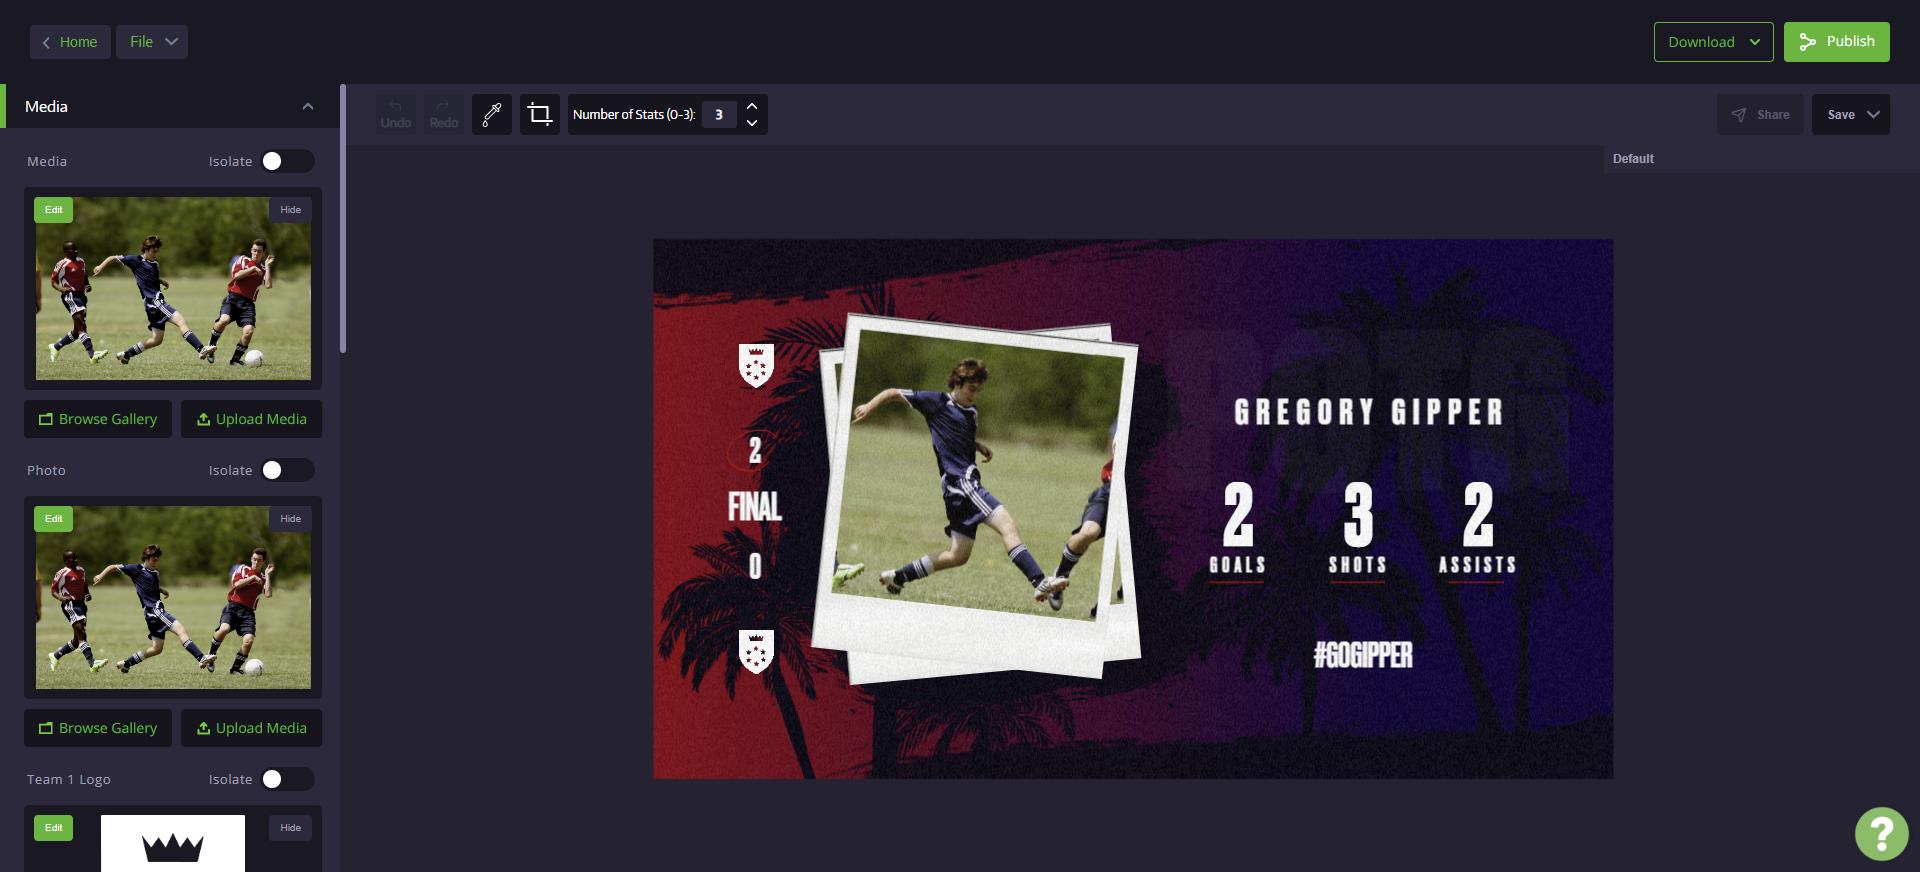 template editor showing player of the week graphic where user can change color, text, and images to match their branding
